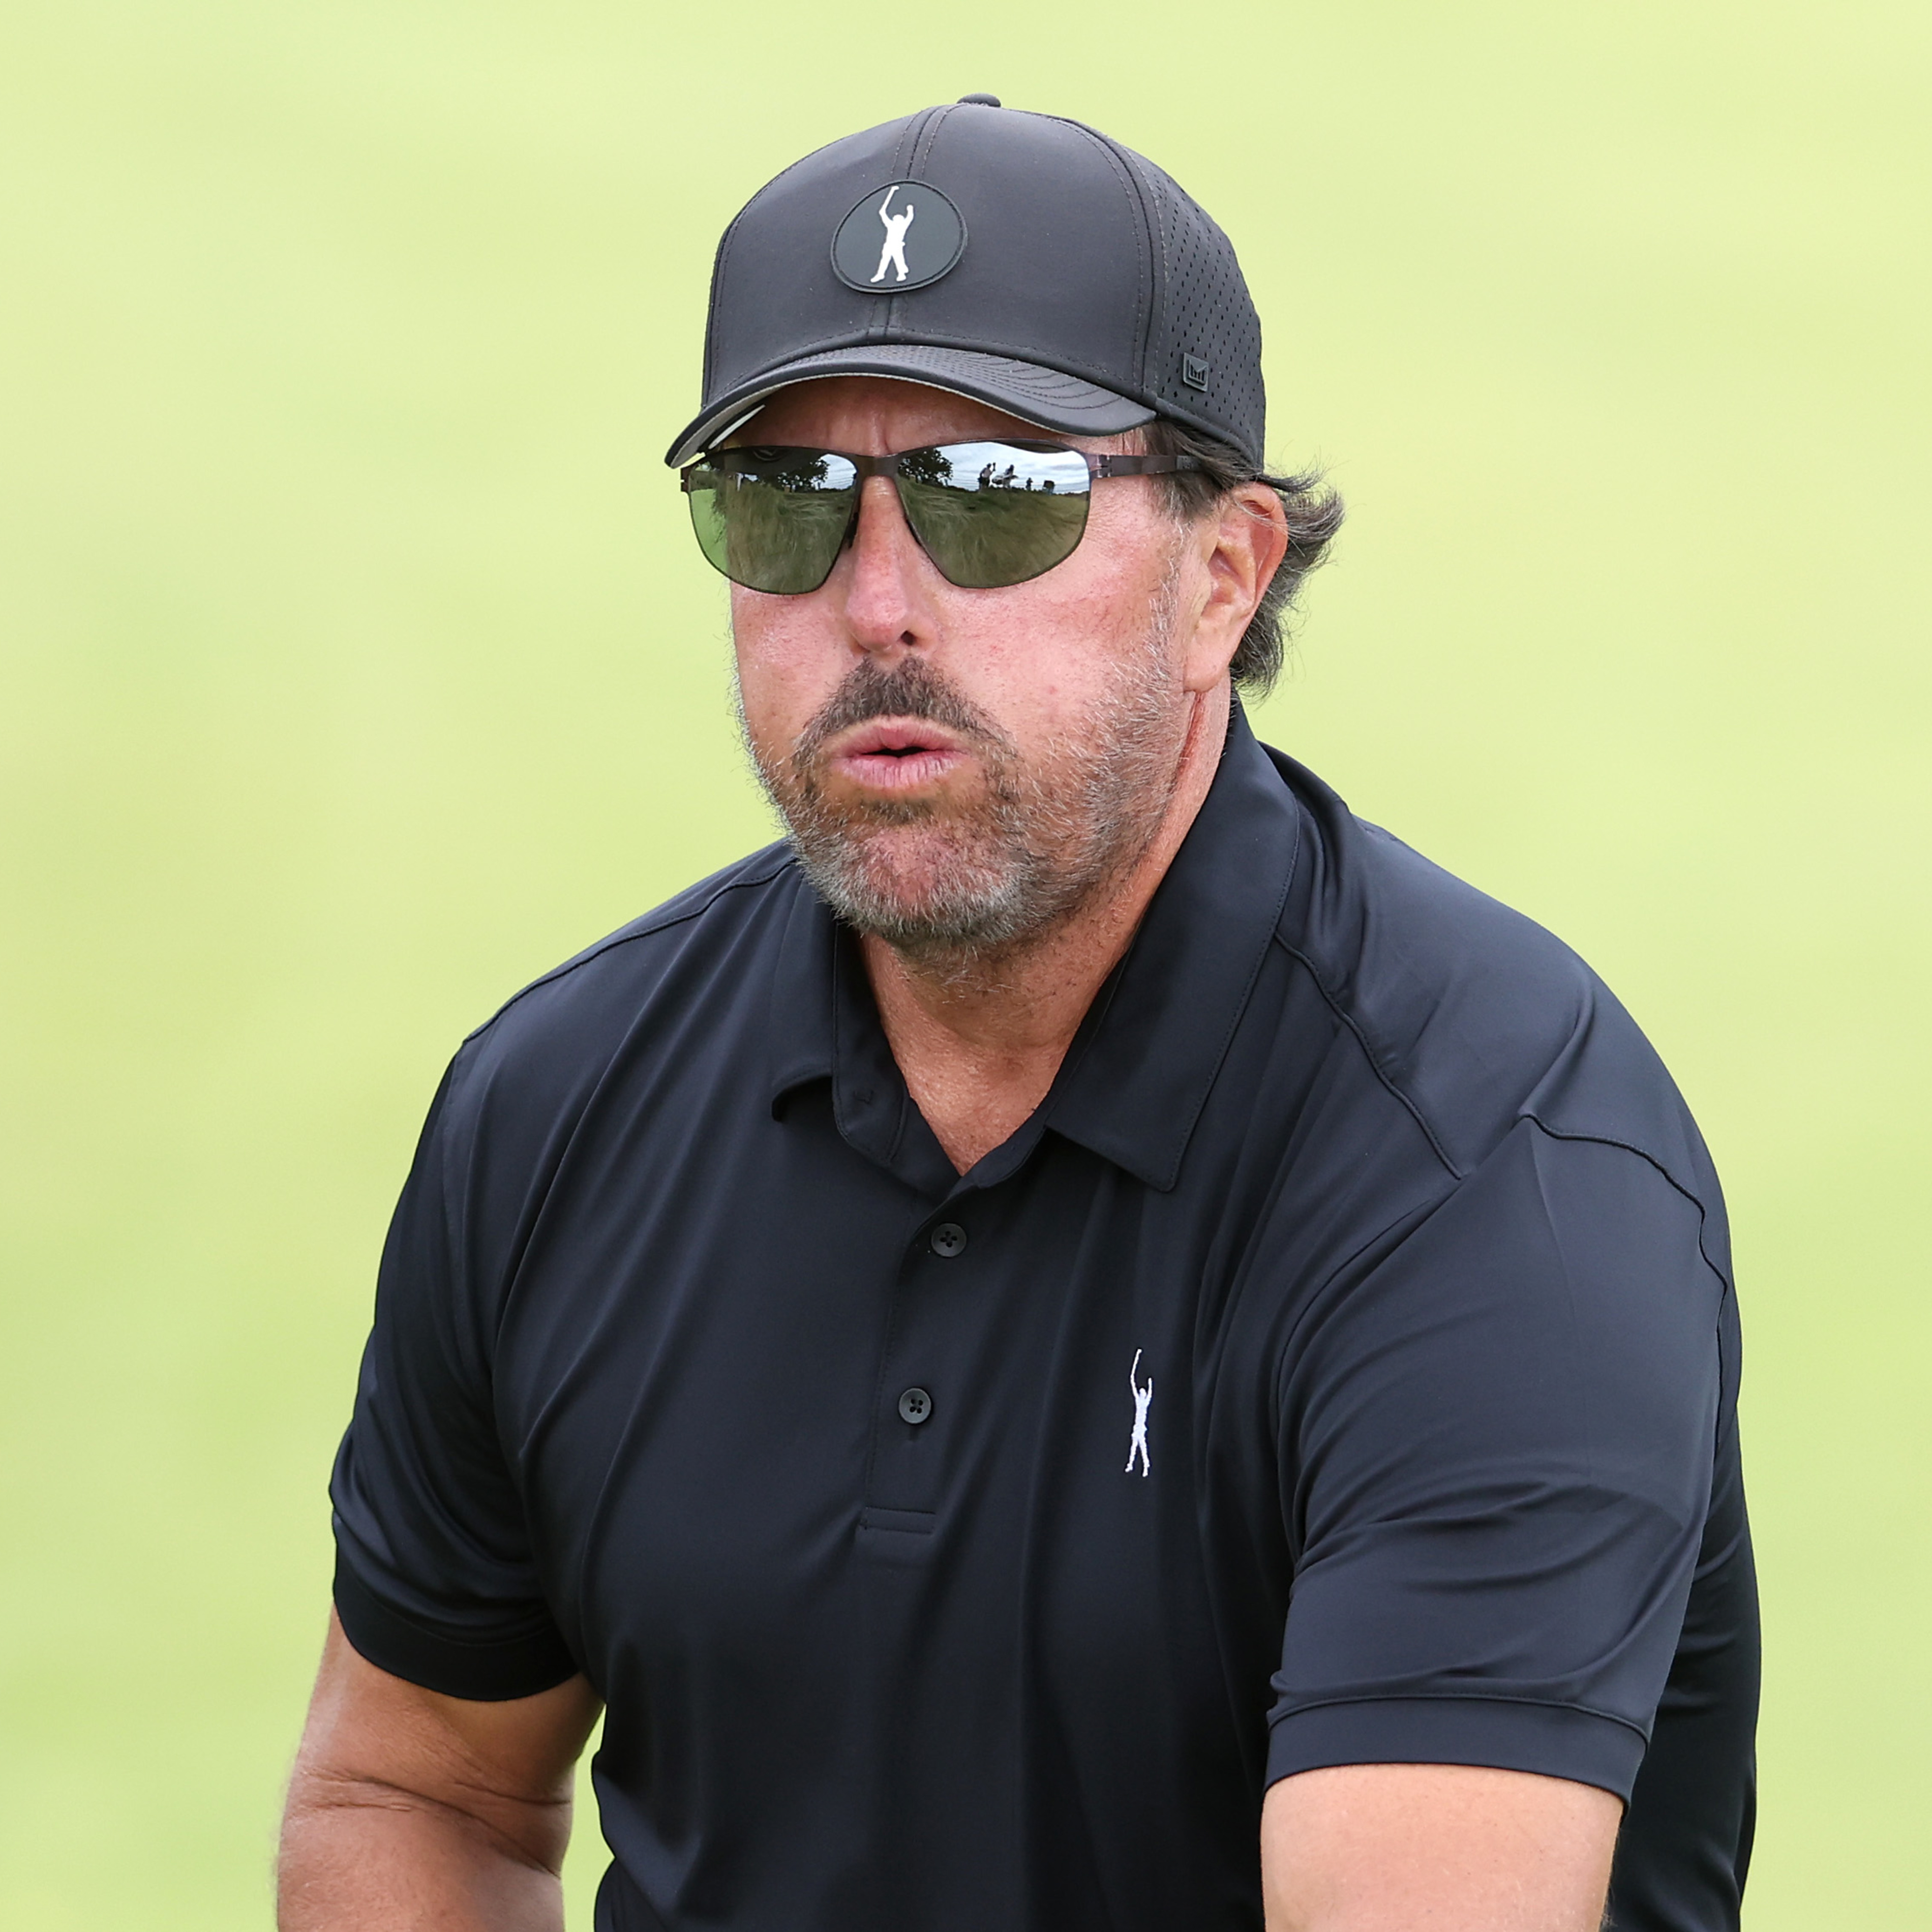 Phil Mickelson Ripped After Shooting 8-Over 78 During 1st Round of 2022 US Open